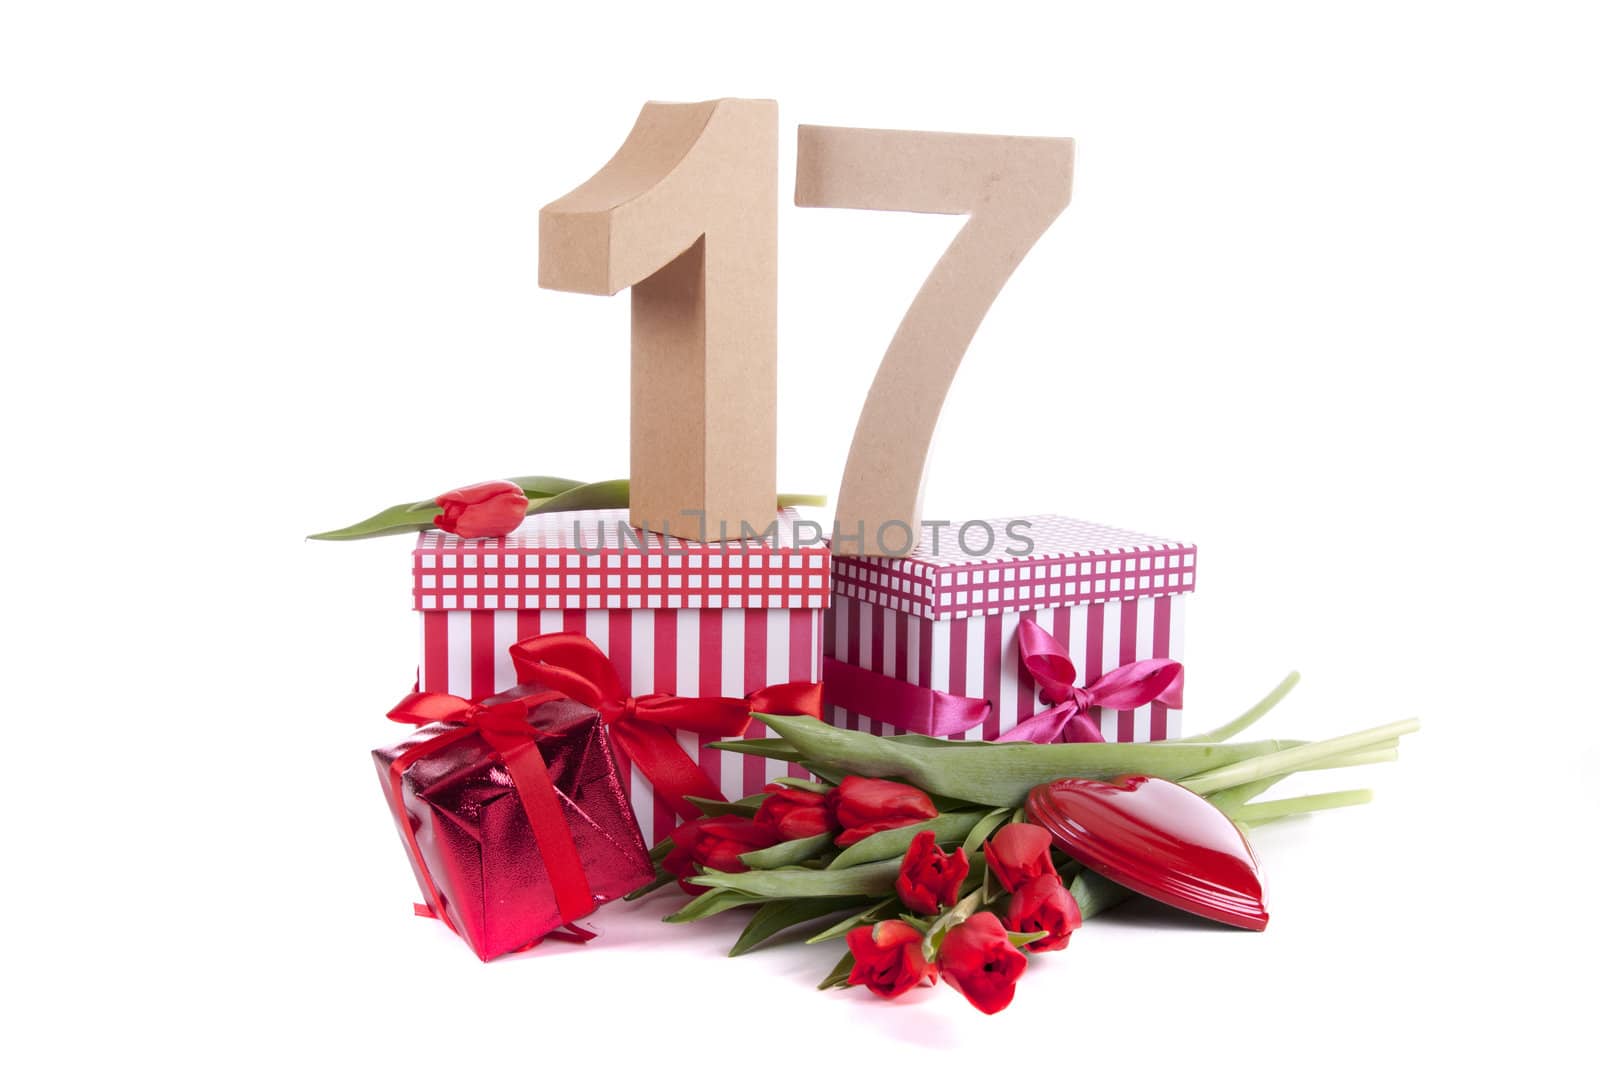 Number of age in a colorful studio setting with a red heart and gifts and tulips